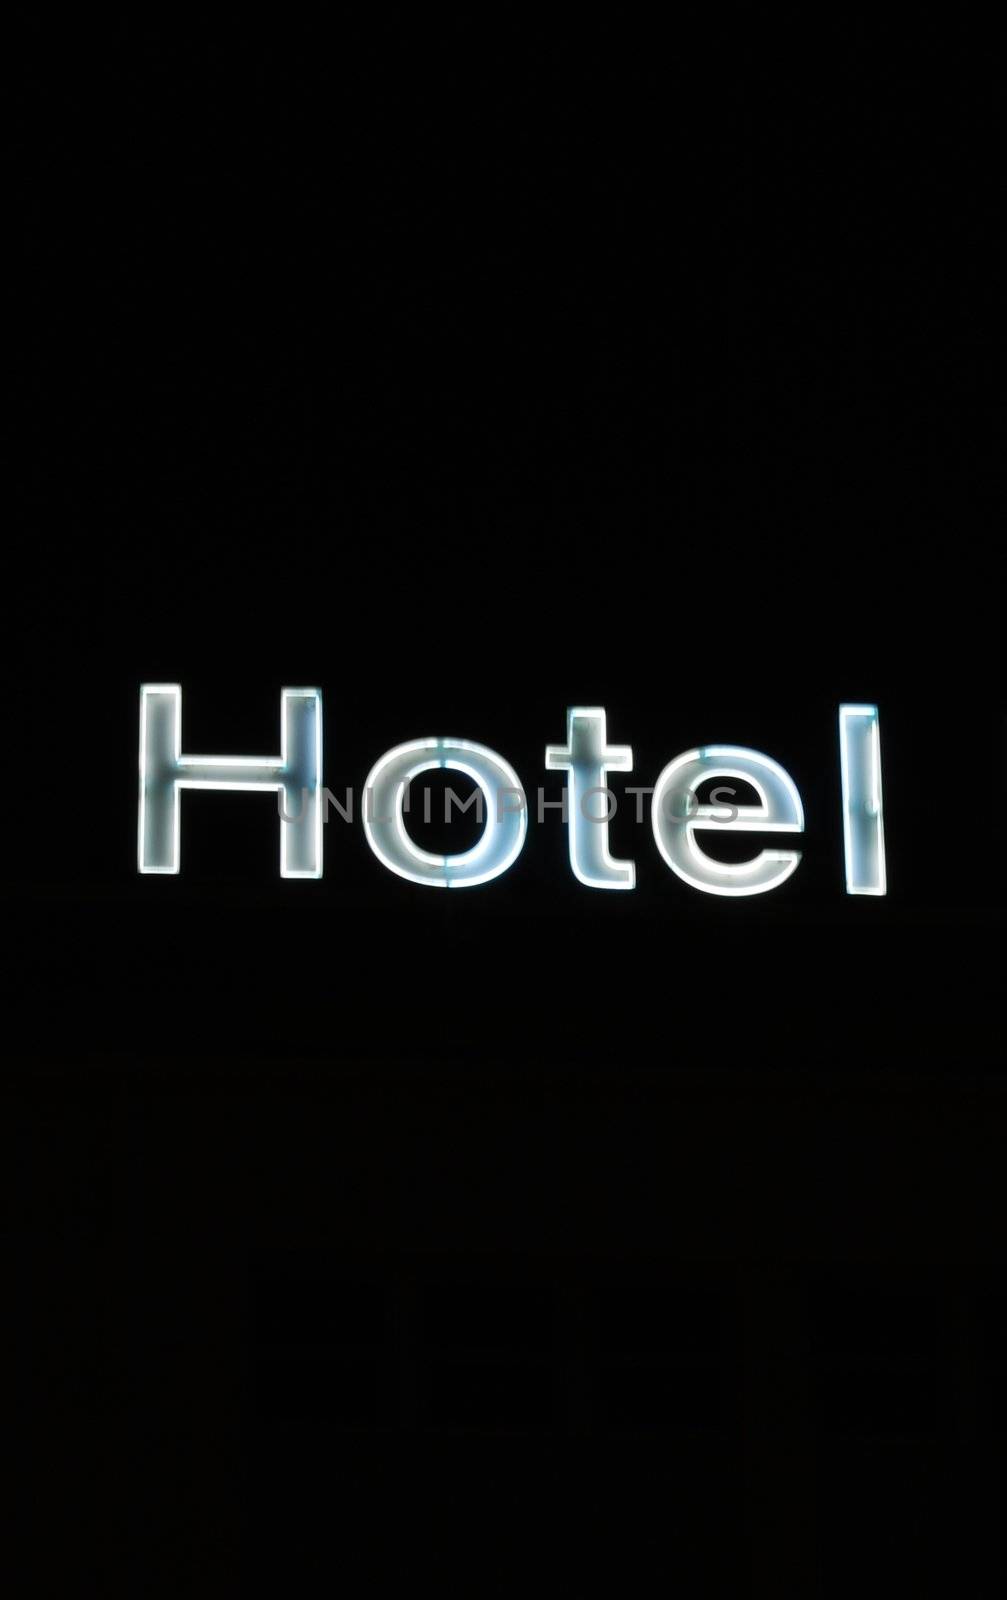 Hotel sign by luissantos84